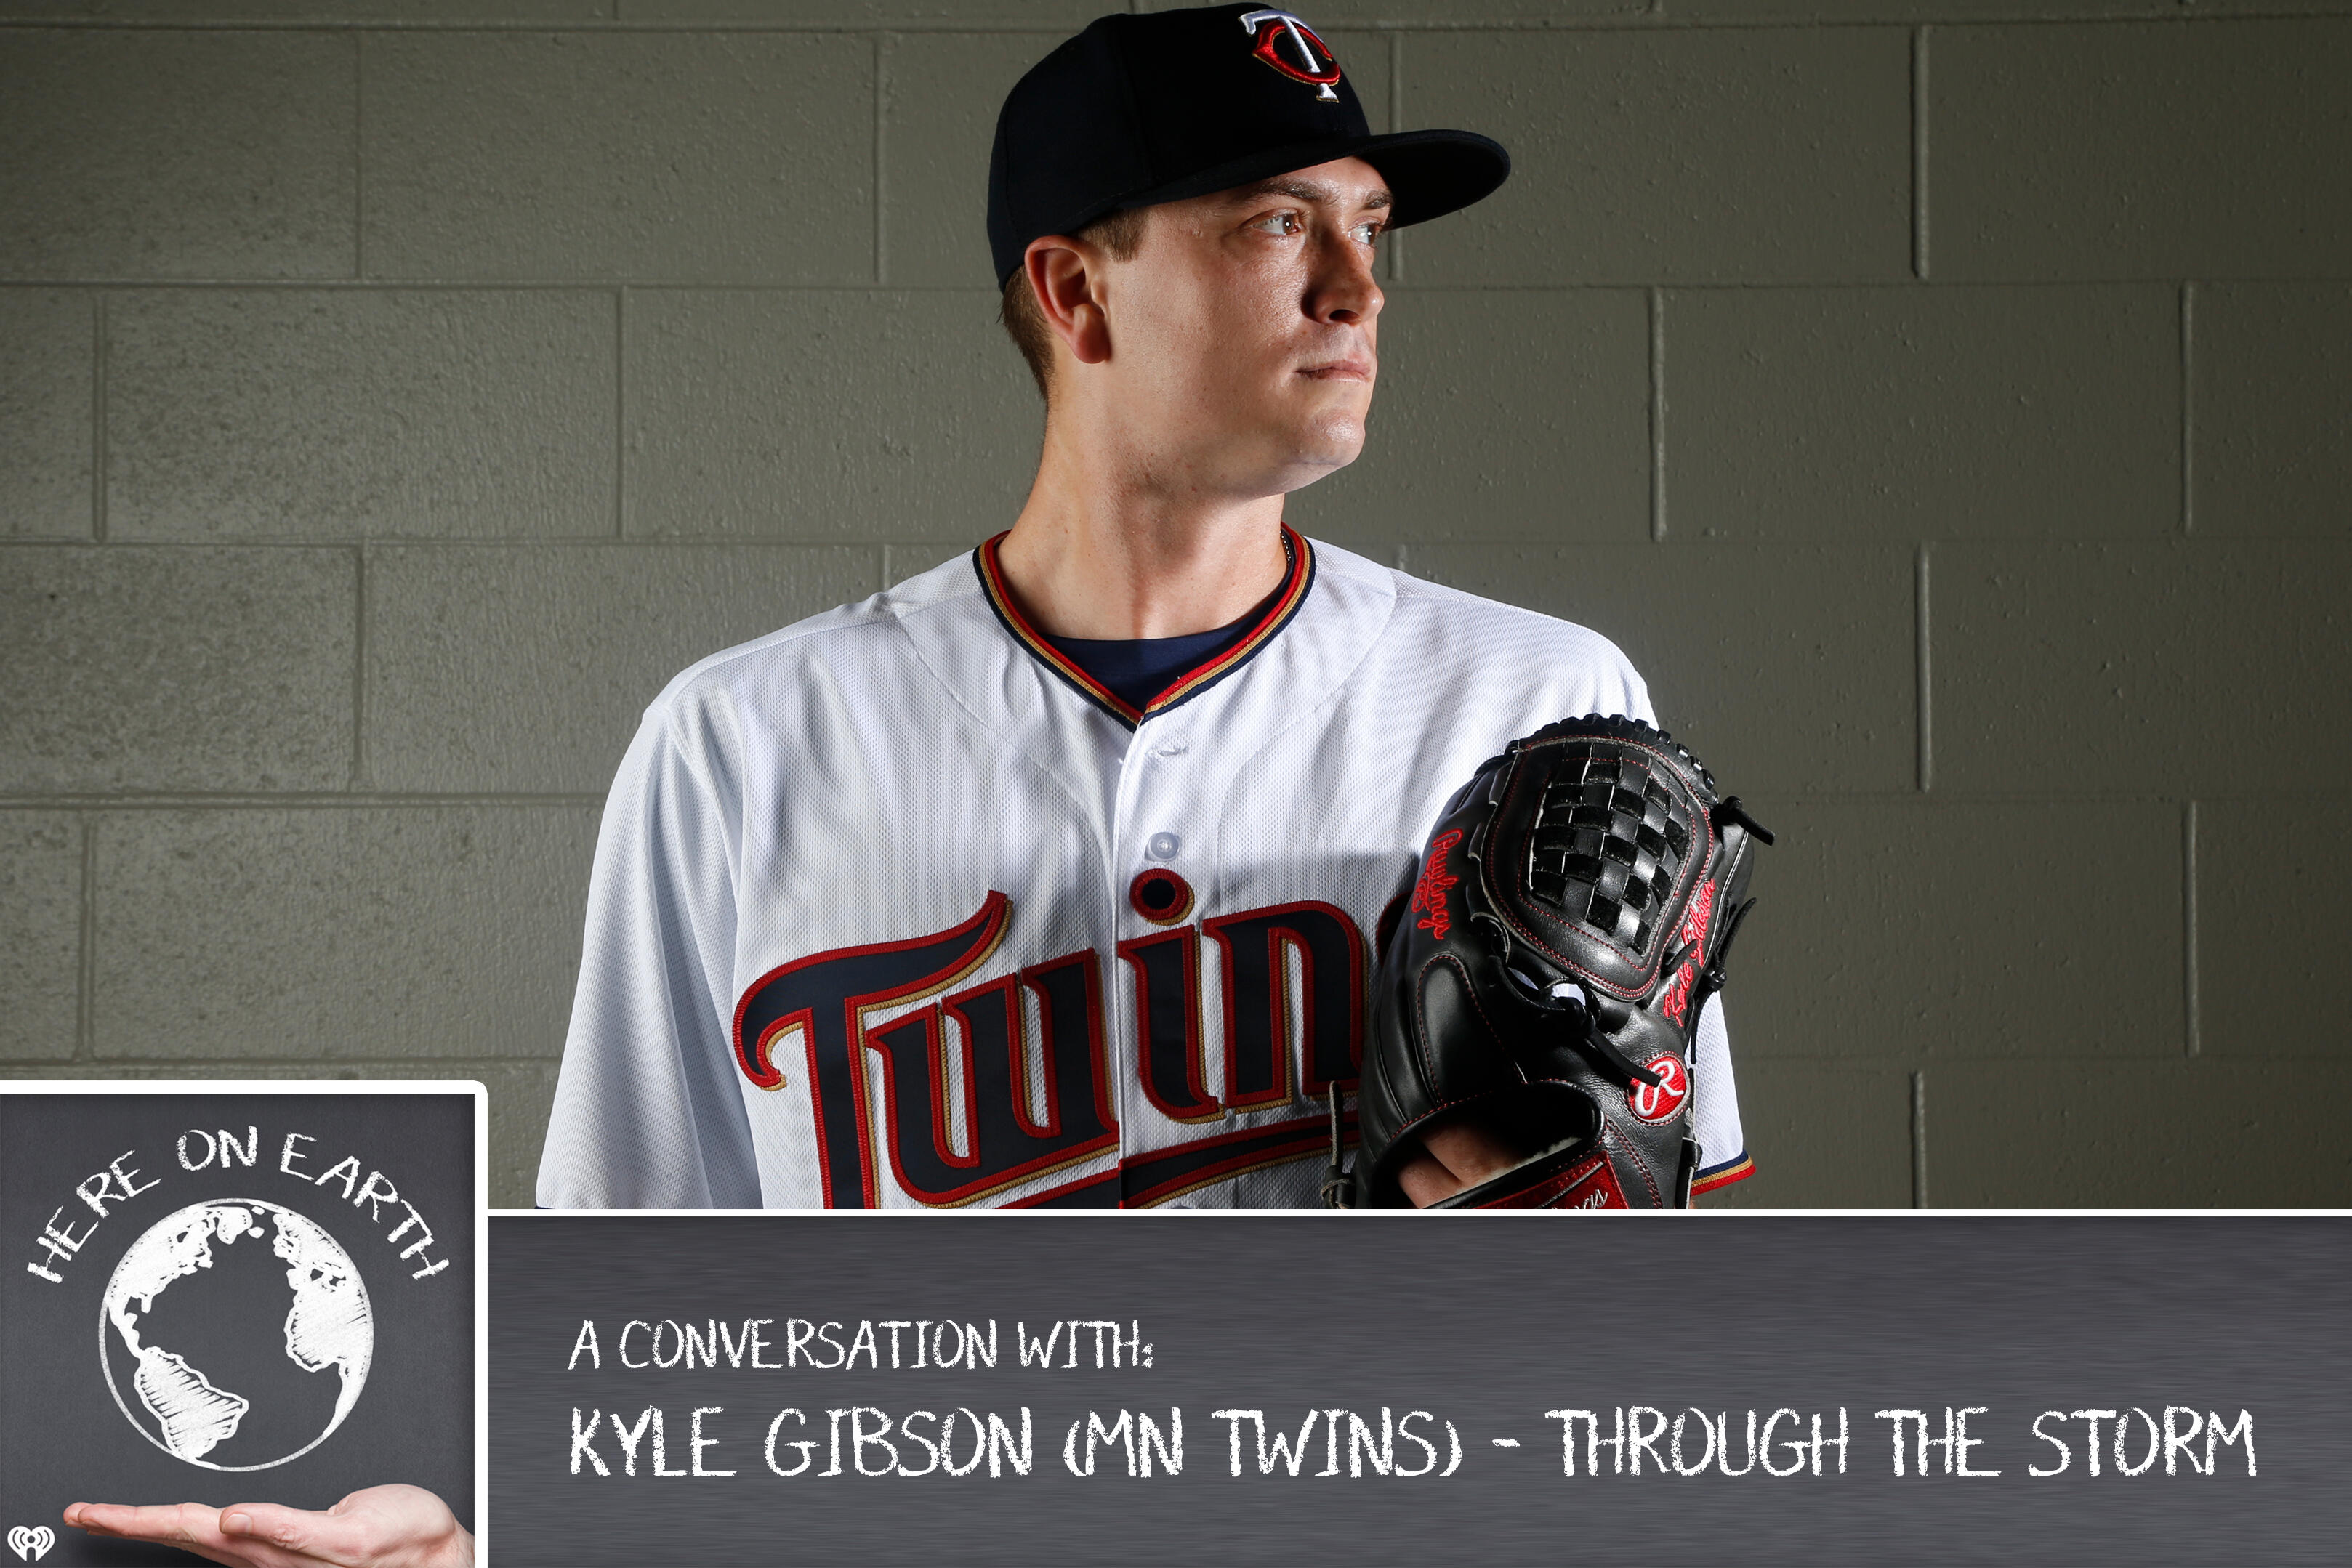 "Through The Storm..." with Minnesota Twins SP Kyle Gibson - Here on Earth - Thumbnail Image